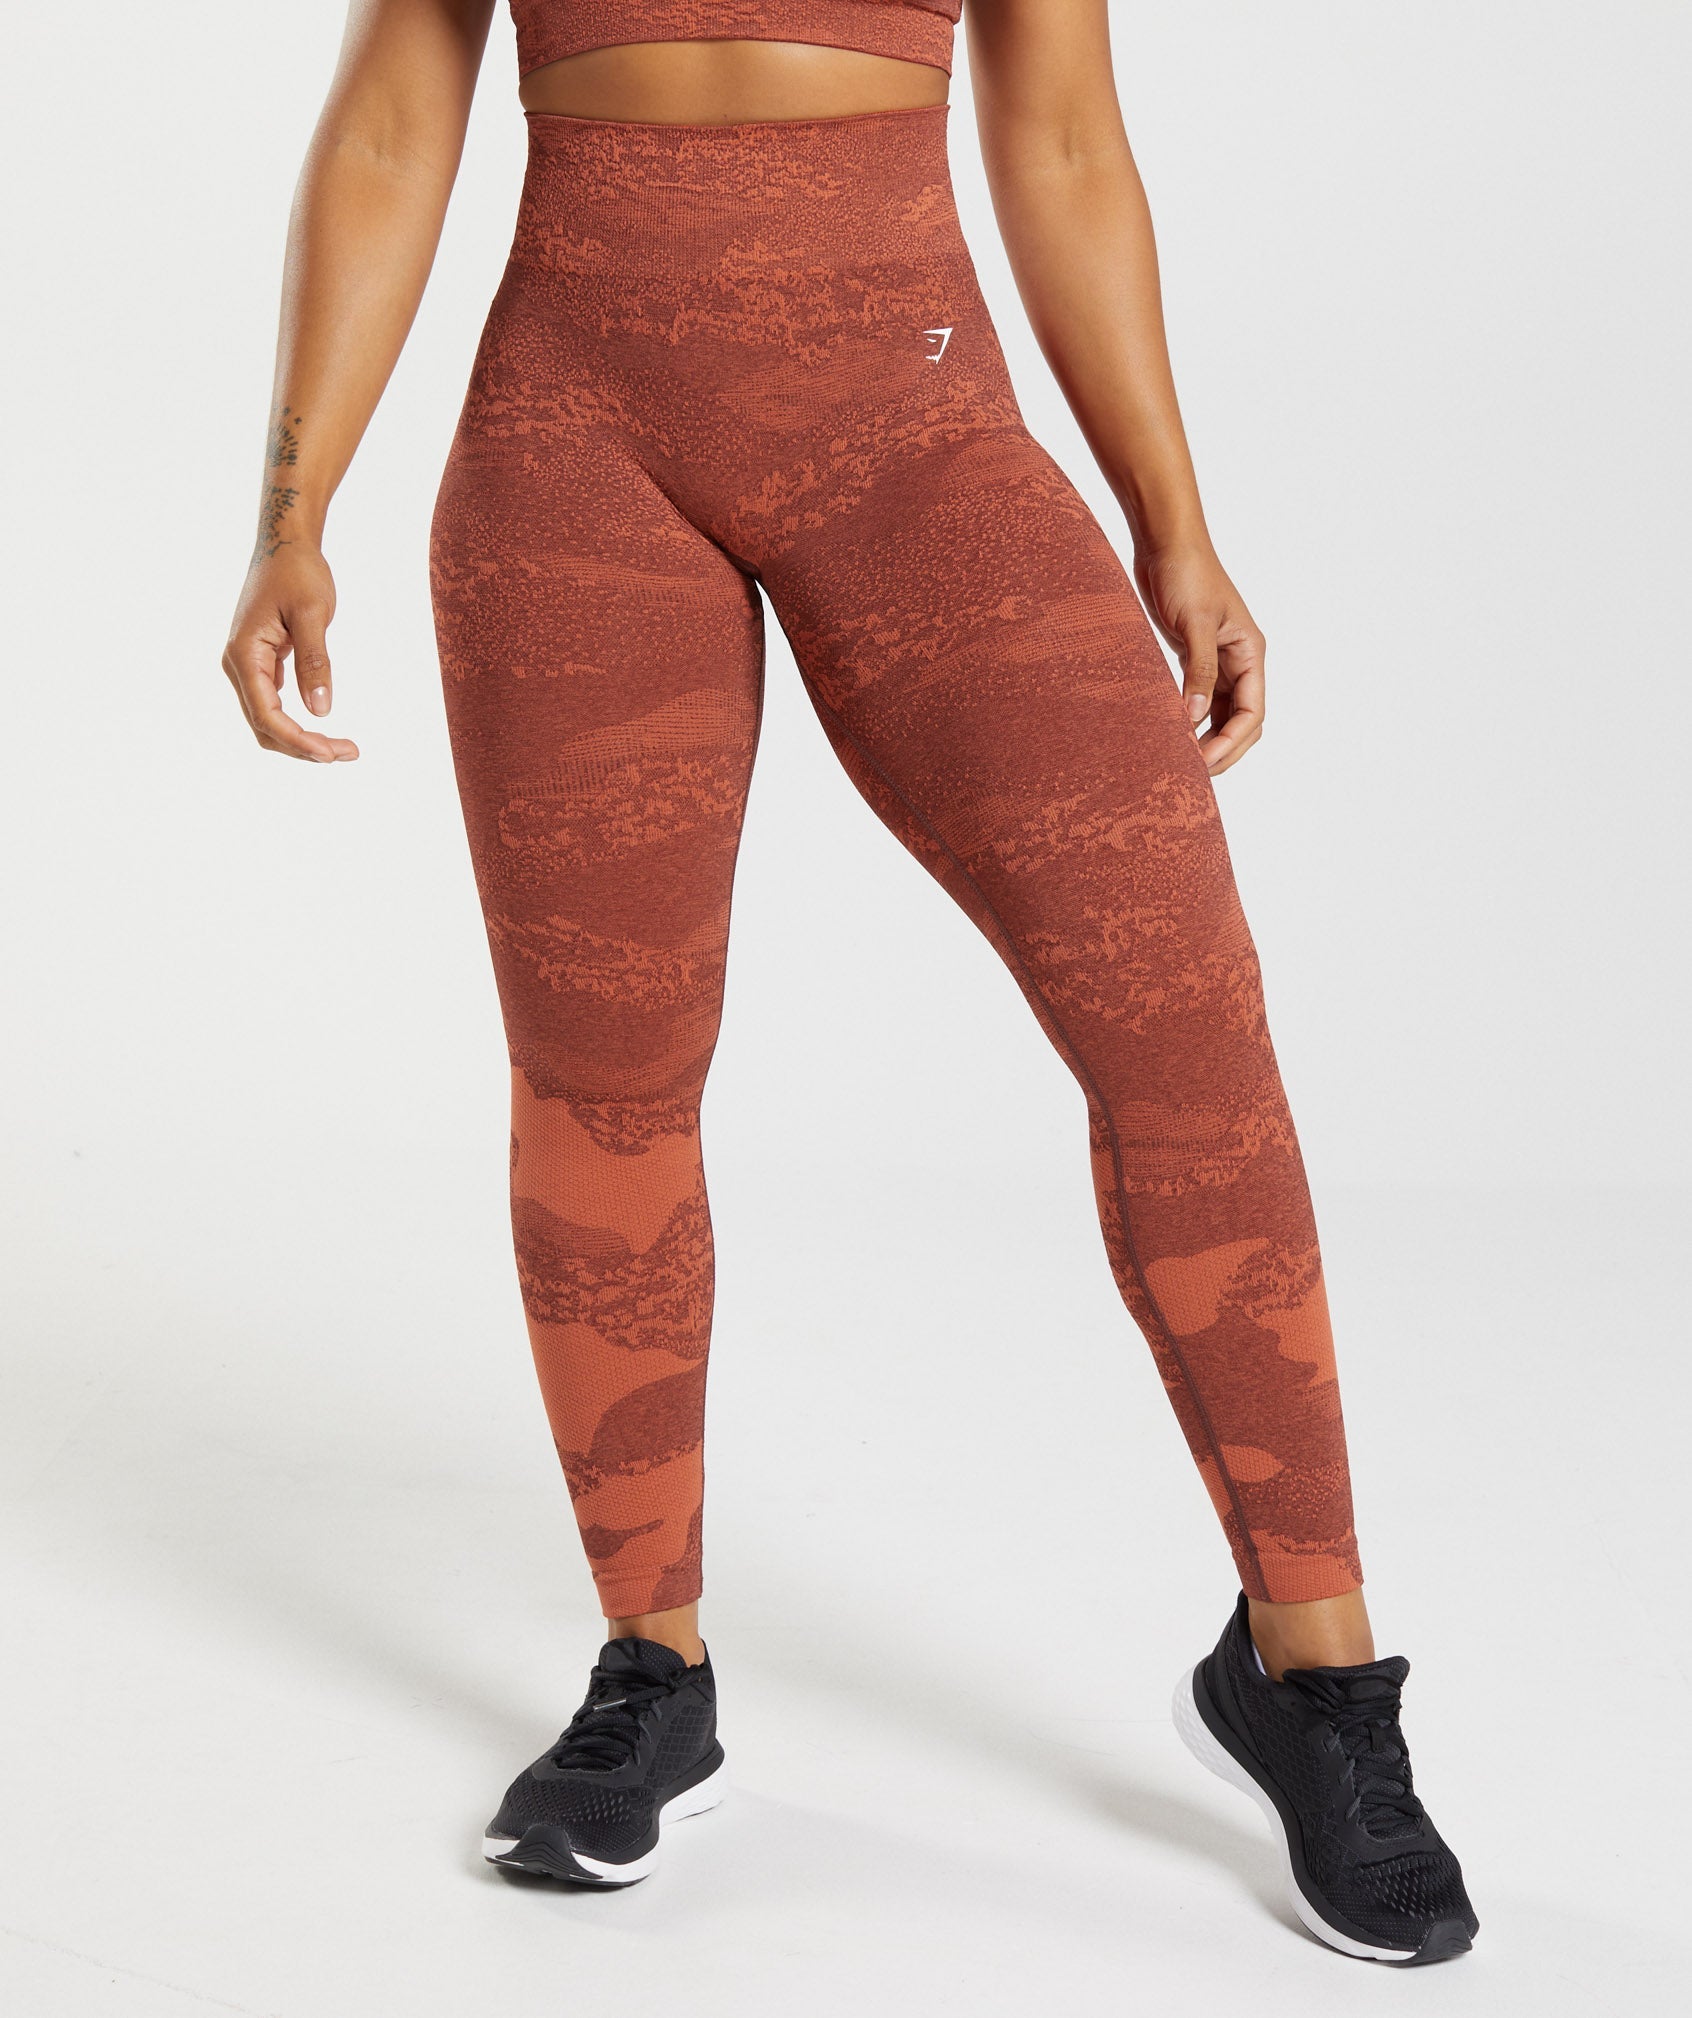 Gymshark Camo Seamless Leggings Black Size M - $29 (51% Off Retail) - From  Abbie